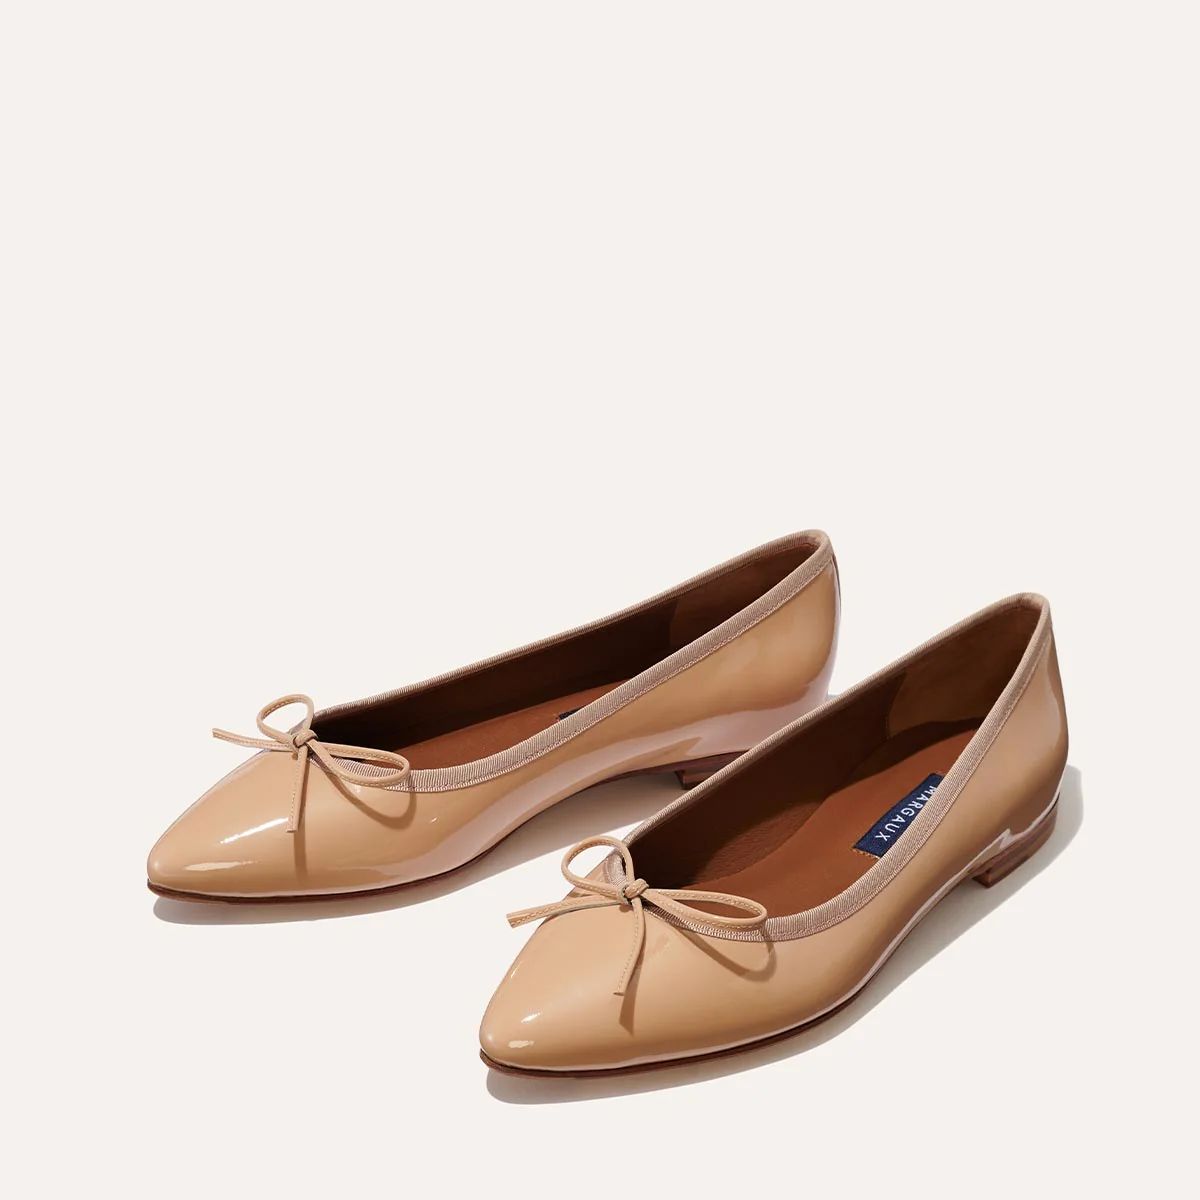 The Pointe - Dune Patent | Margaux